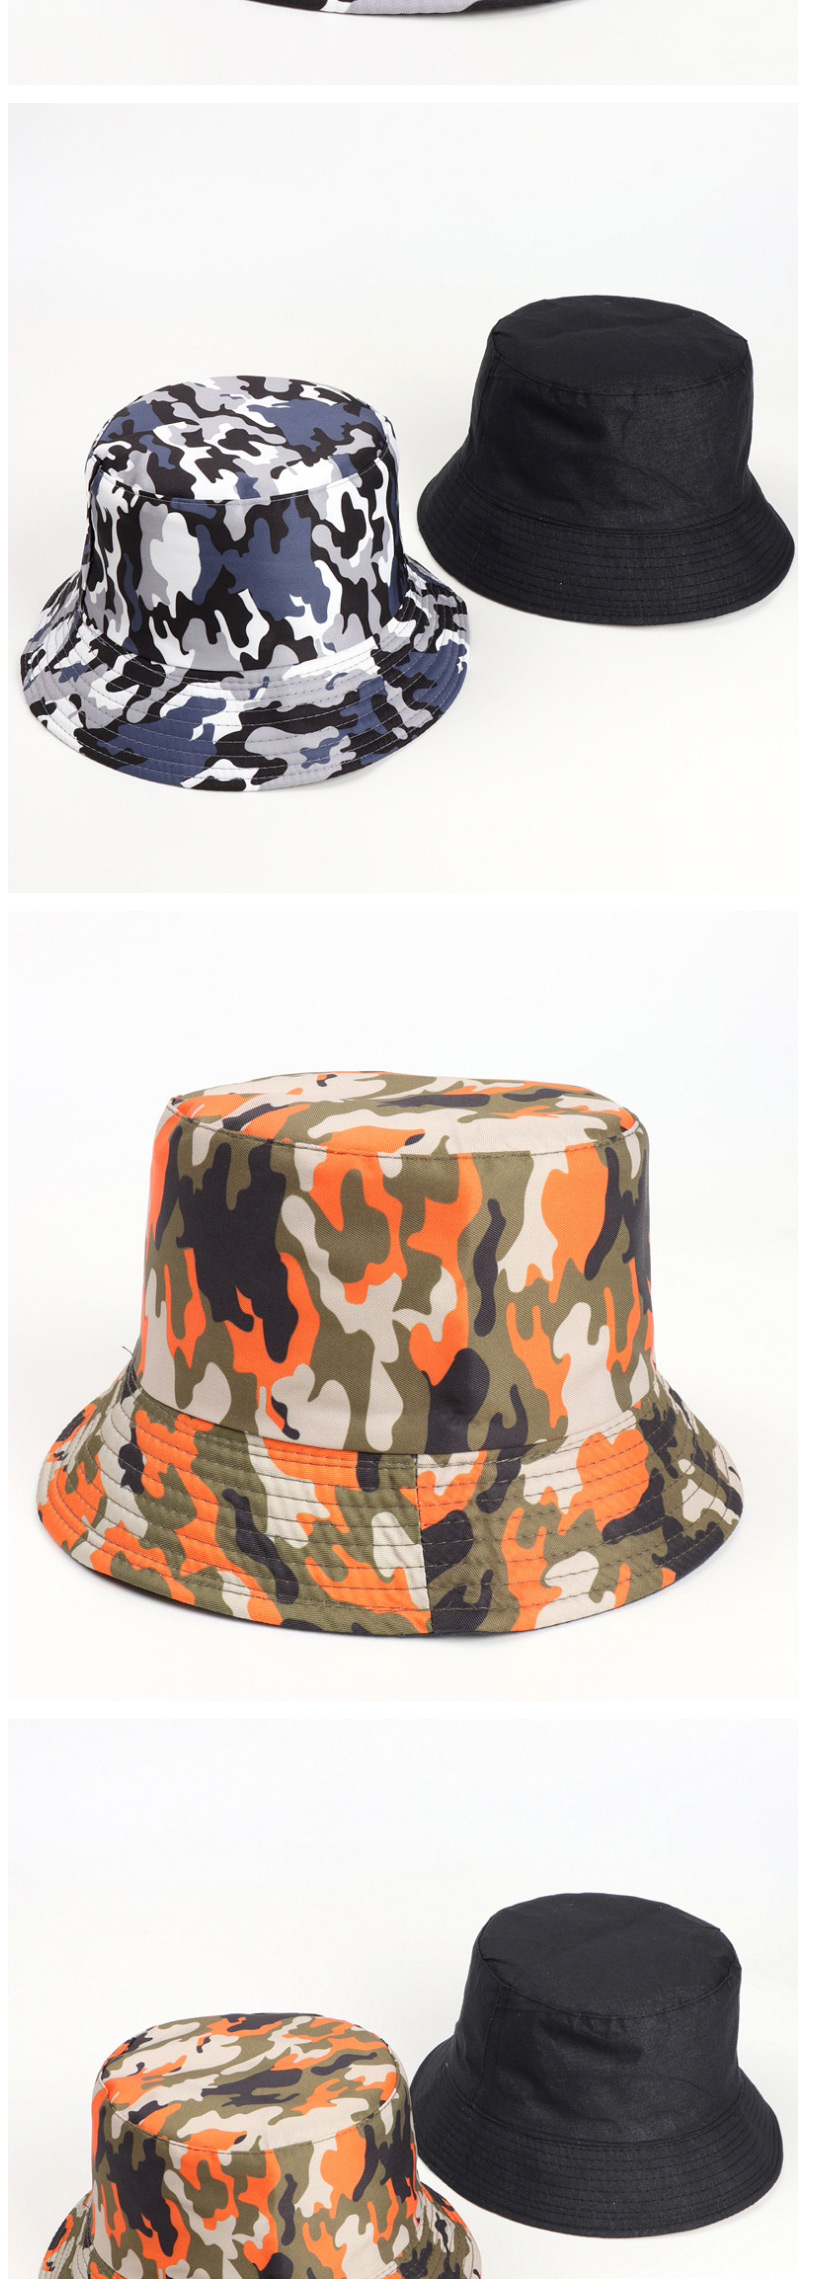 Fashion Gray Printed Double-sided Multicolor Camouflage Fisherman Hat,Sun Hats